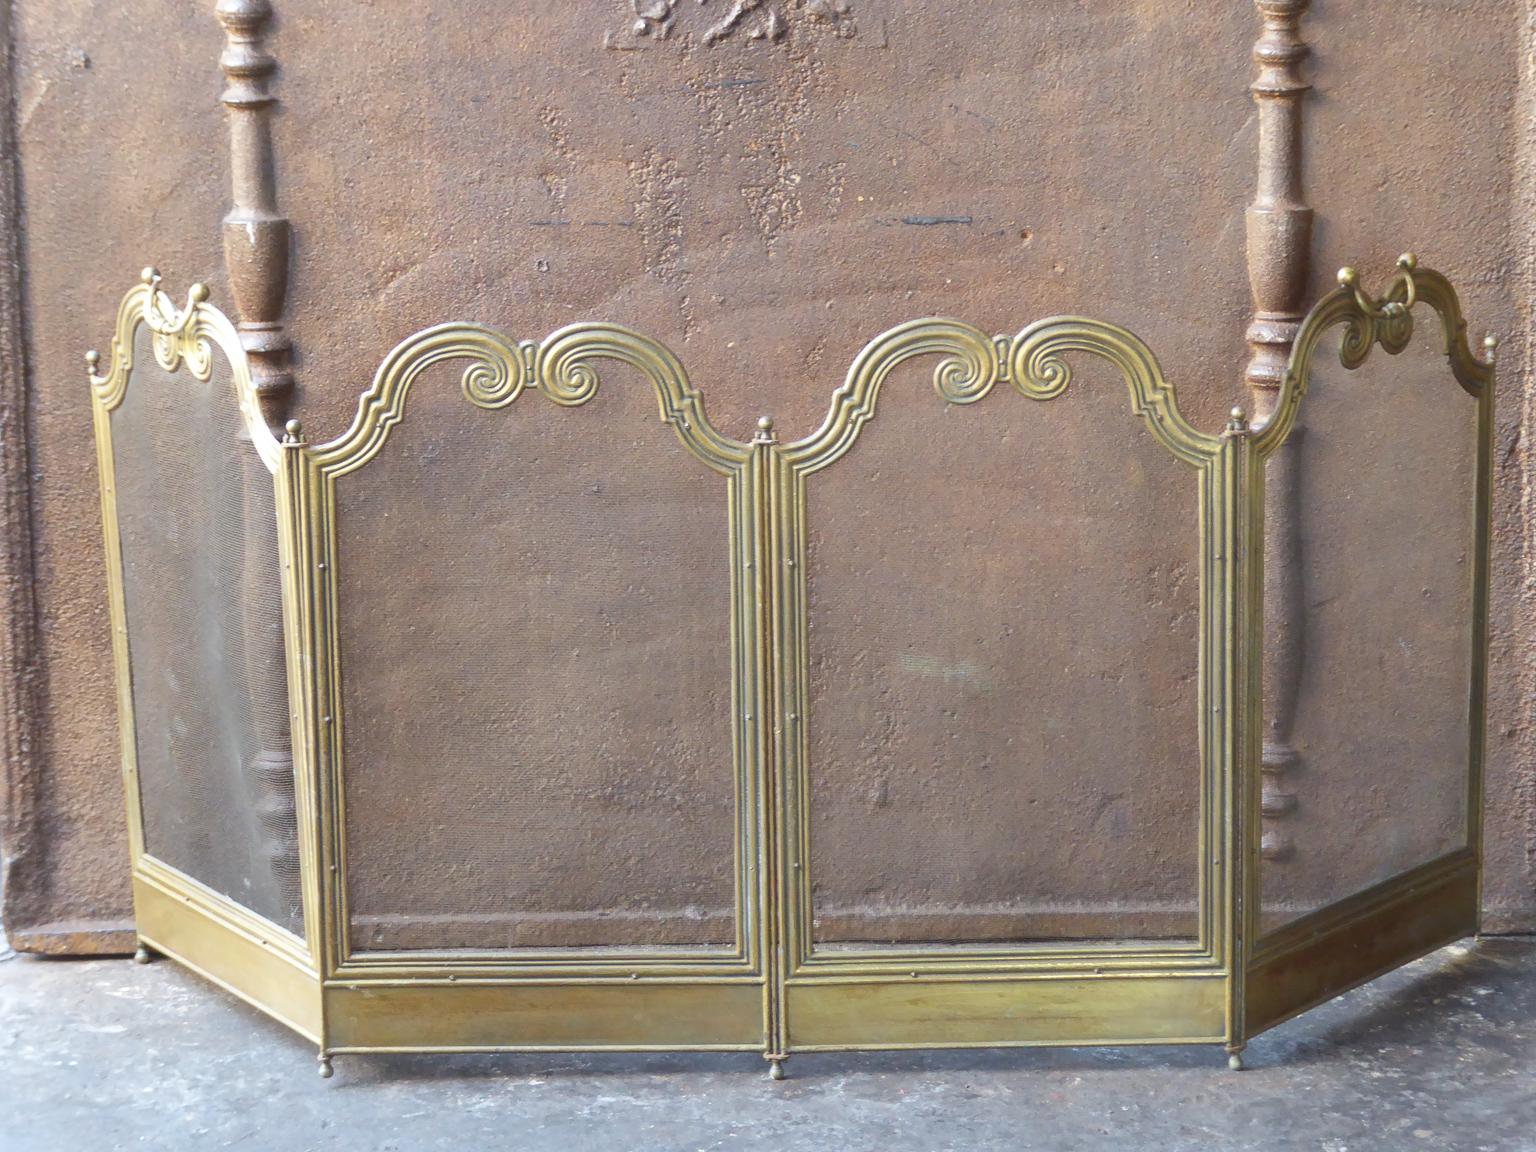 20th century French Napoleon III style four panel fireplace screen. The screen is made of brass and iron mesh. 







 